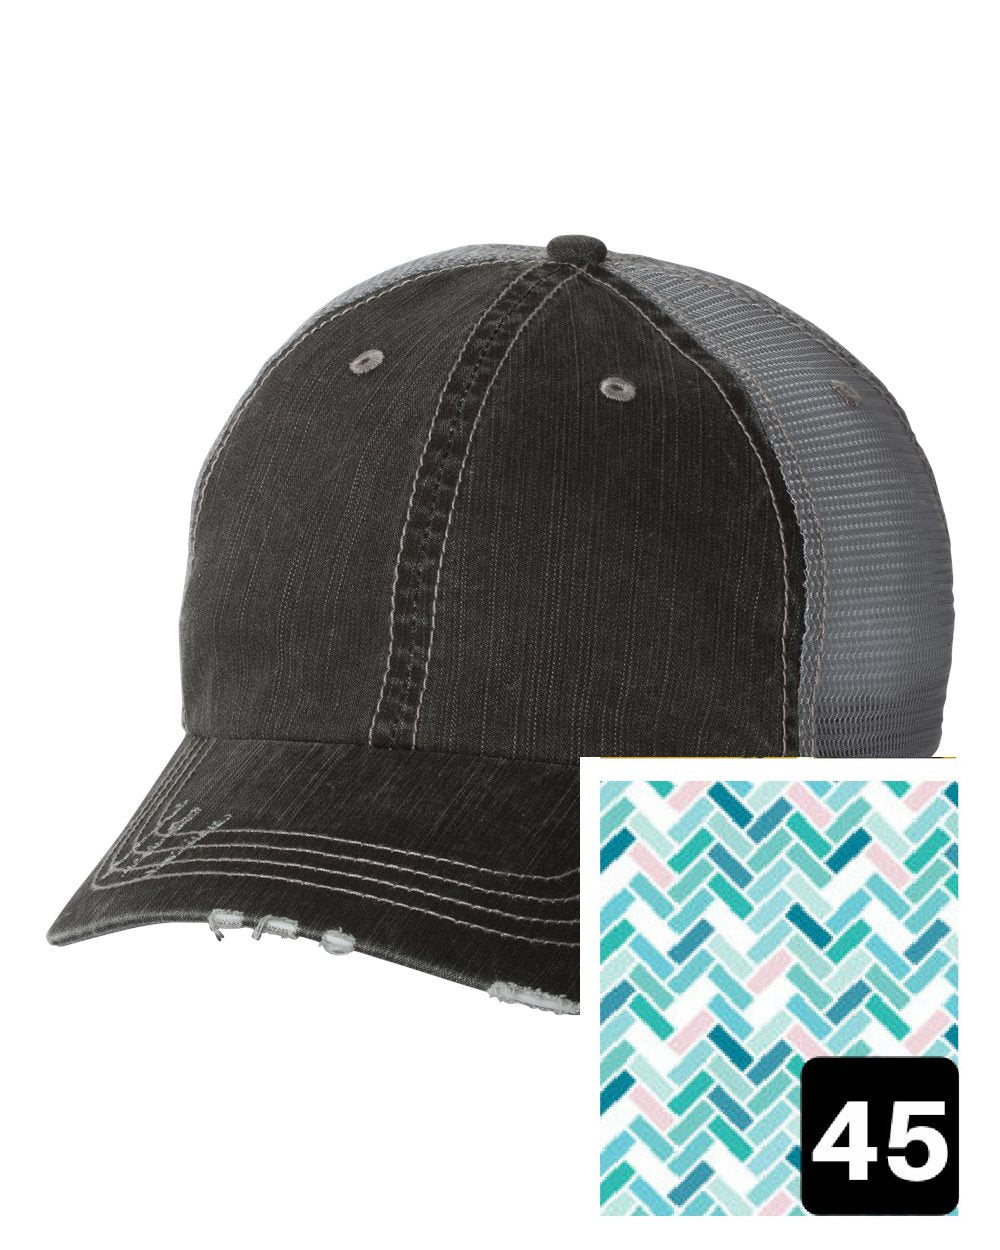 West Virginia Hat - Distressed Ponytail or Messy Bun Hat  - Many Fabric Choices